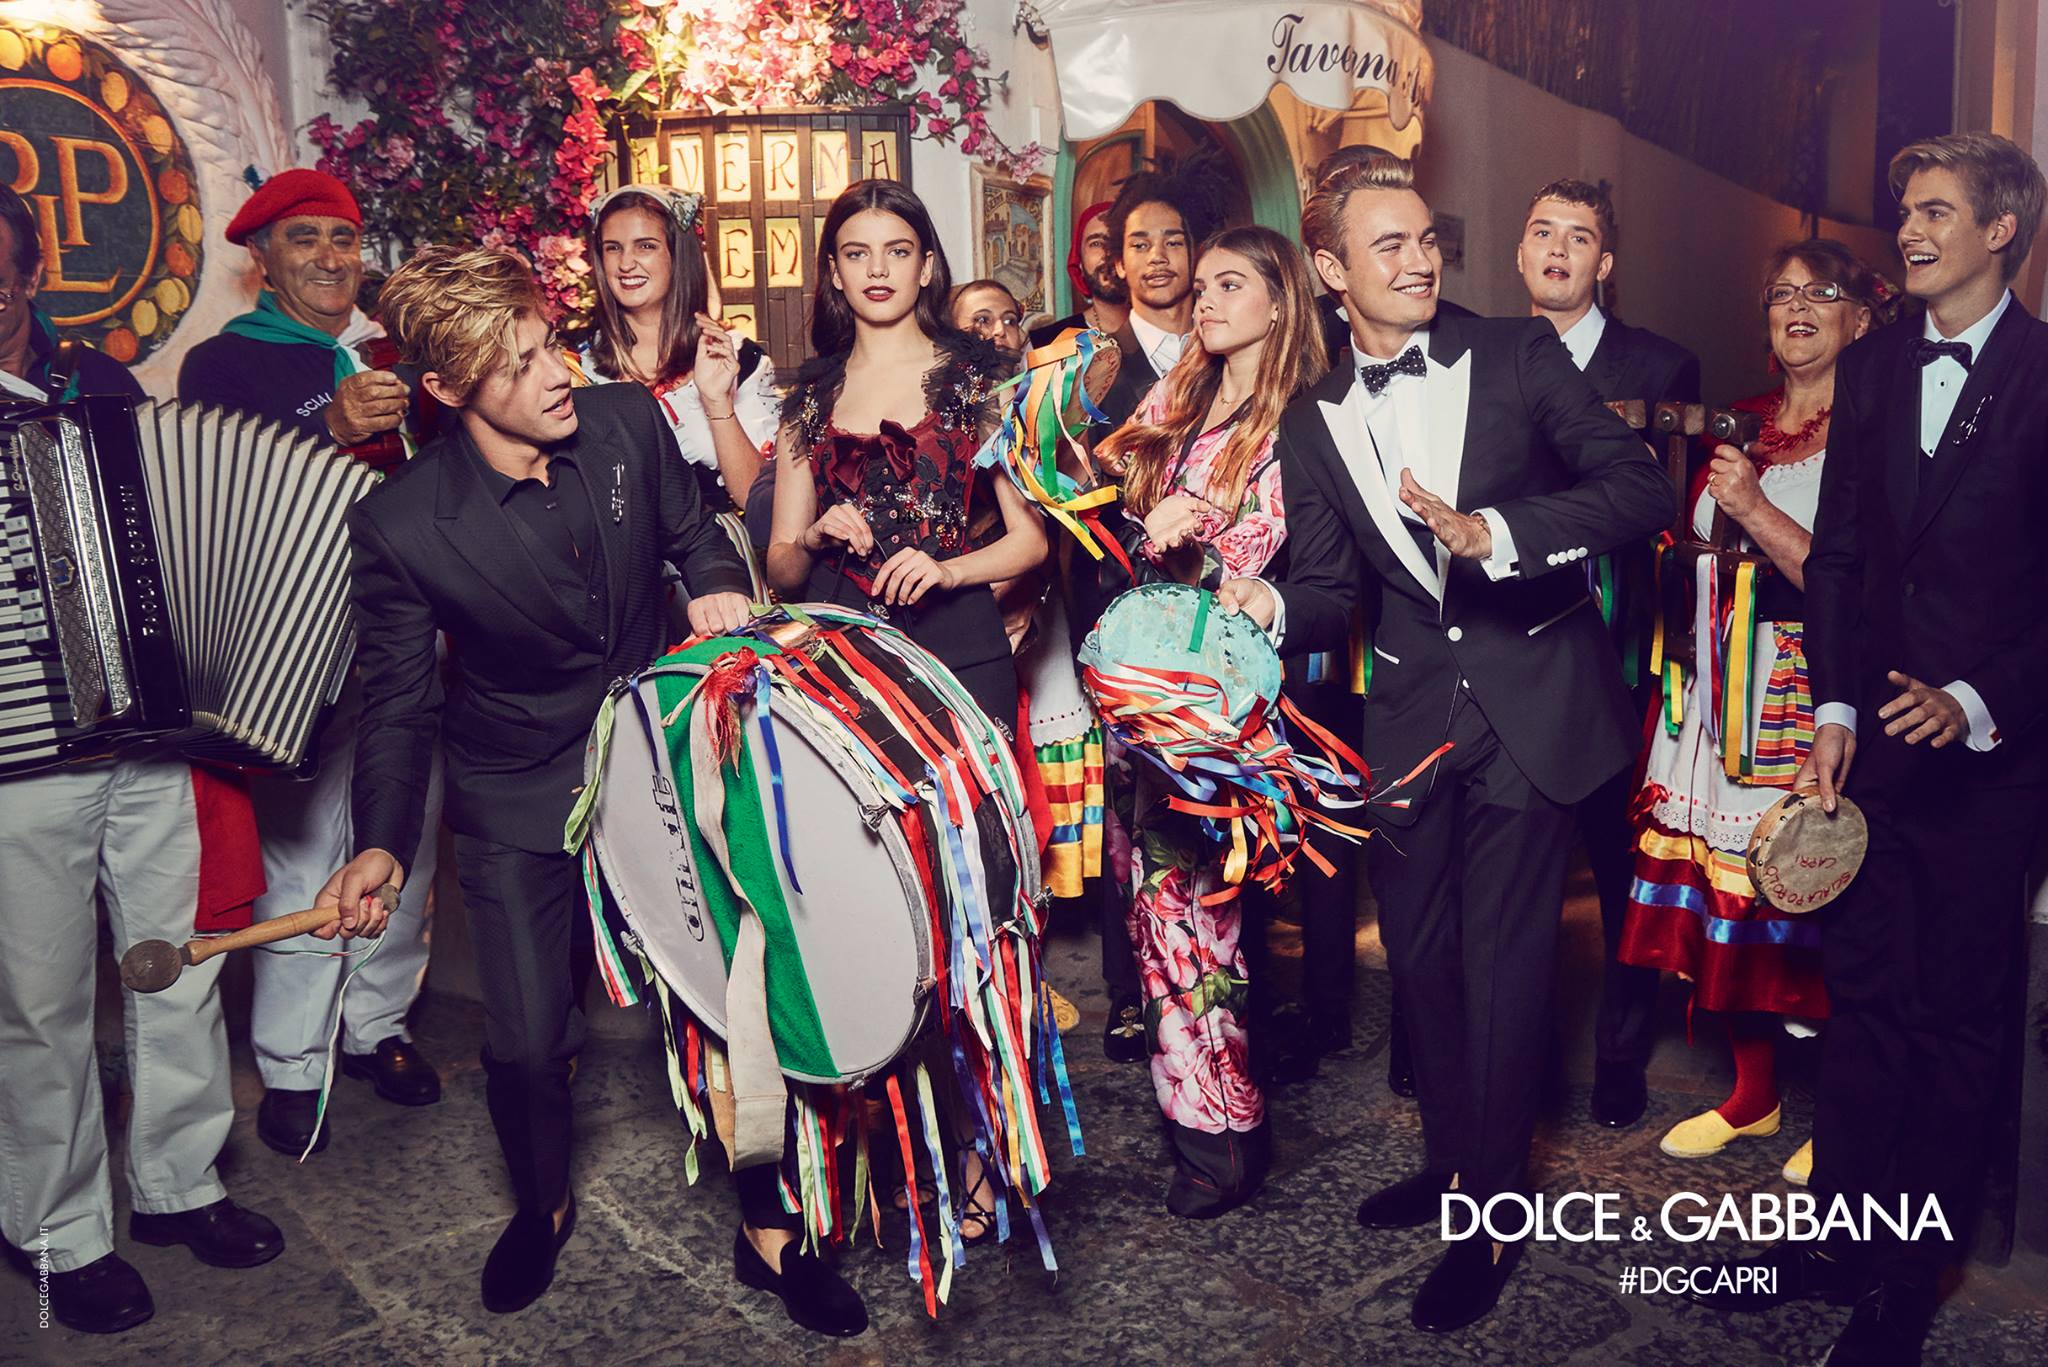 Dolce & Gabbana tests Ho Chi Minh City with pop-up store - Retail in Asia